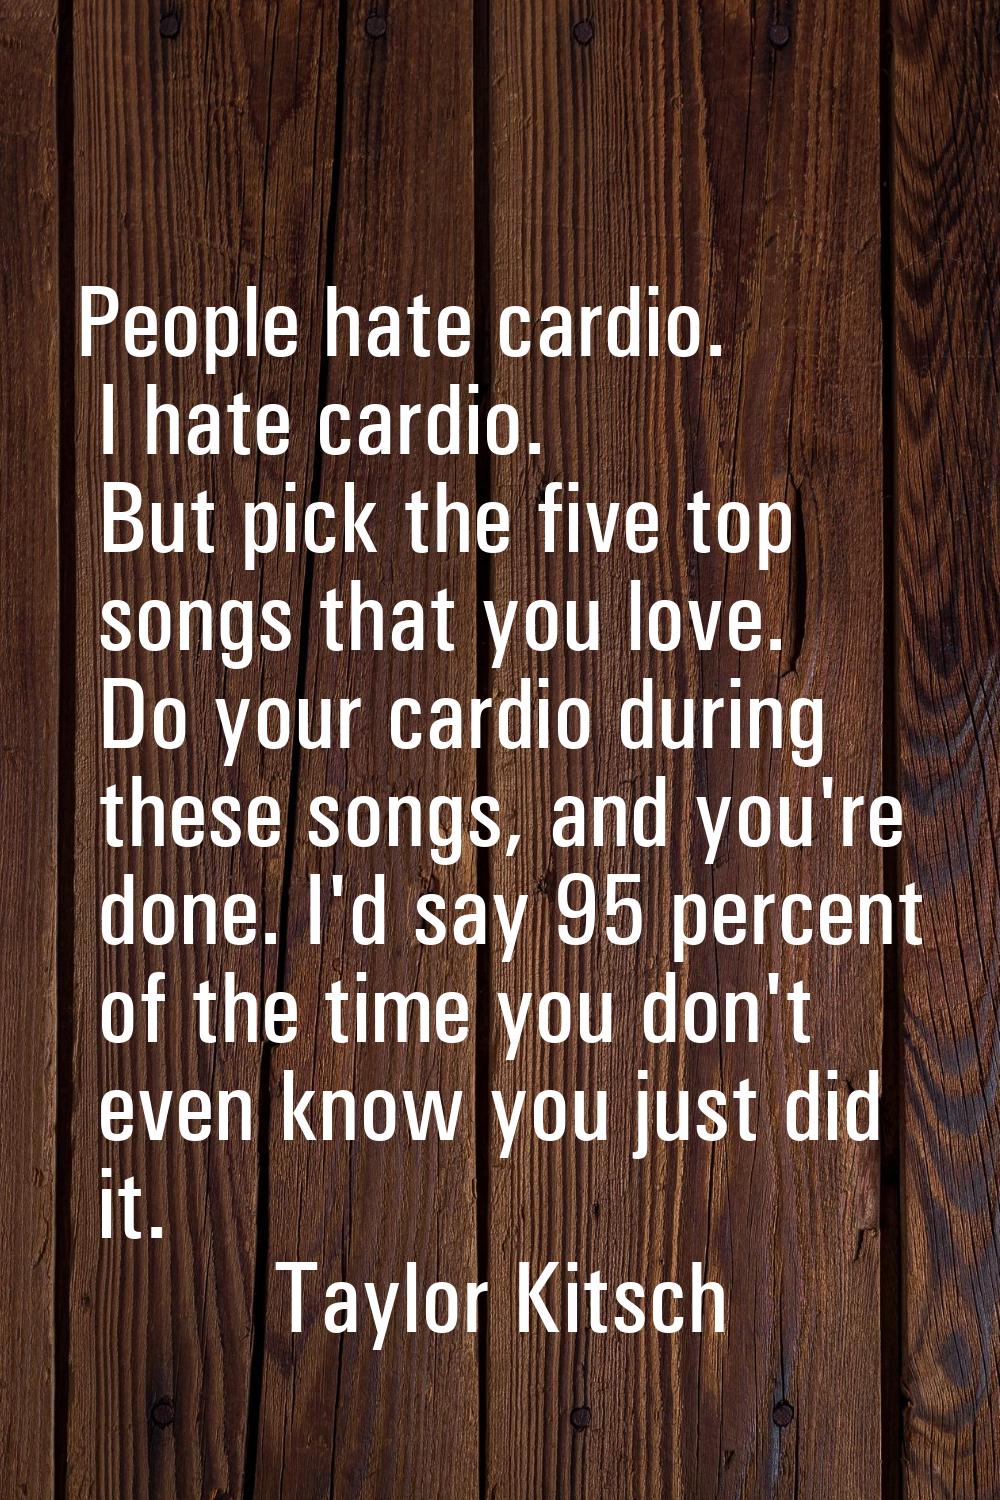 People hate cardio. I hate cardio. But pick the five top songs that you love. Do your cardio during